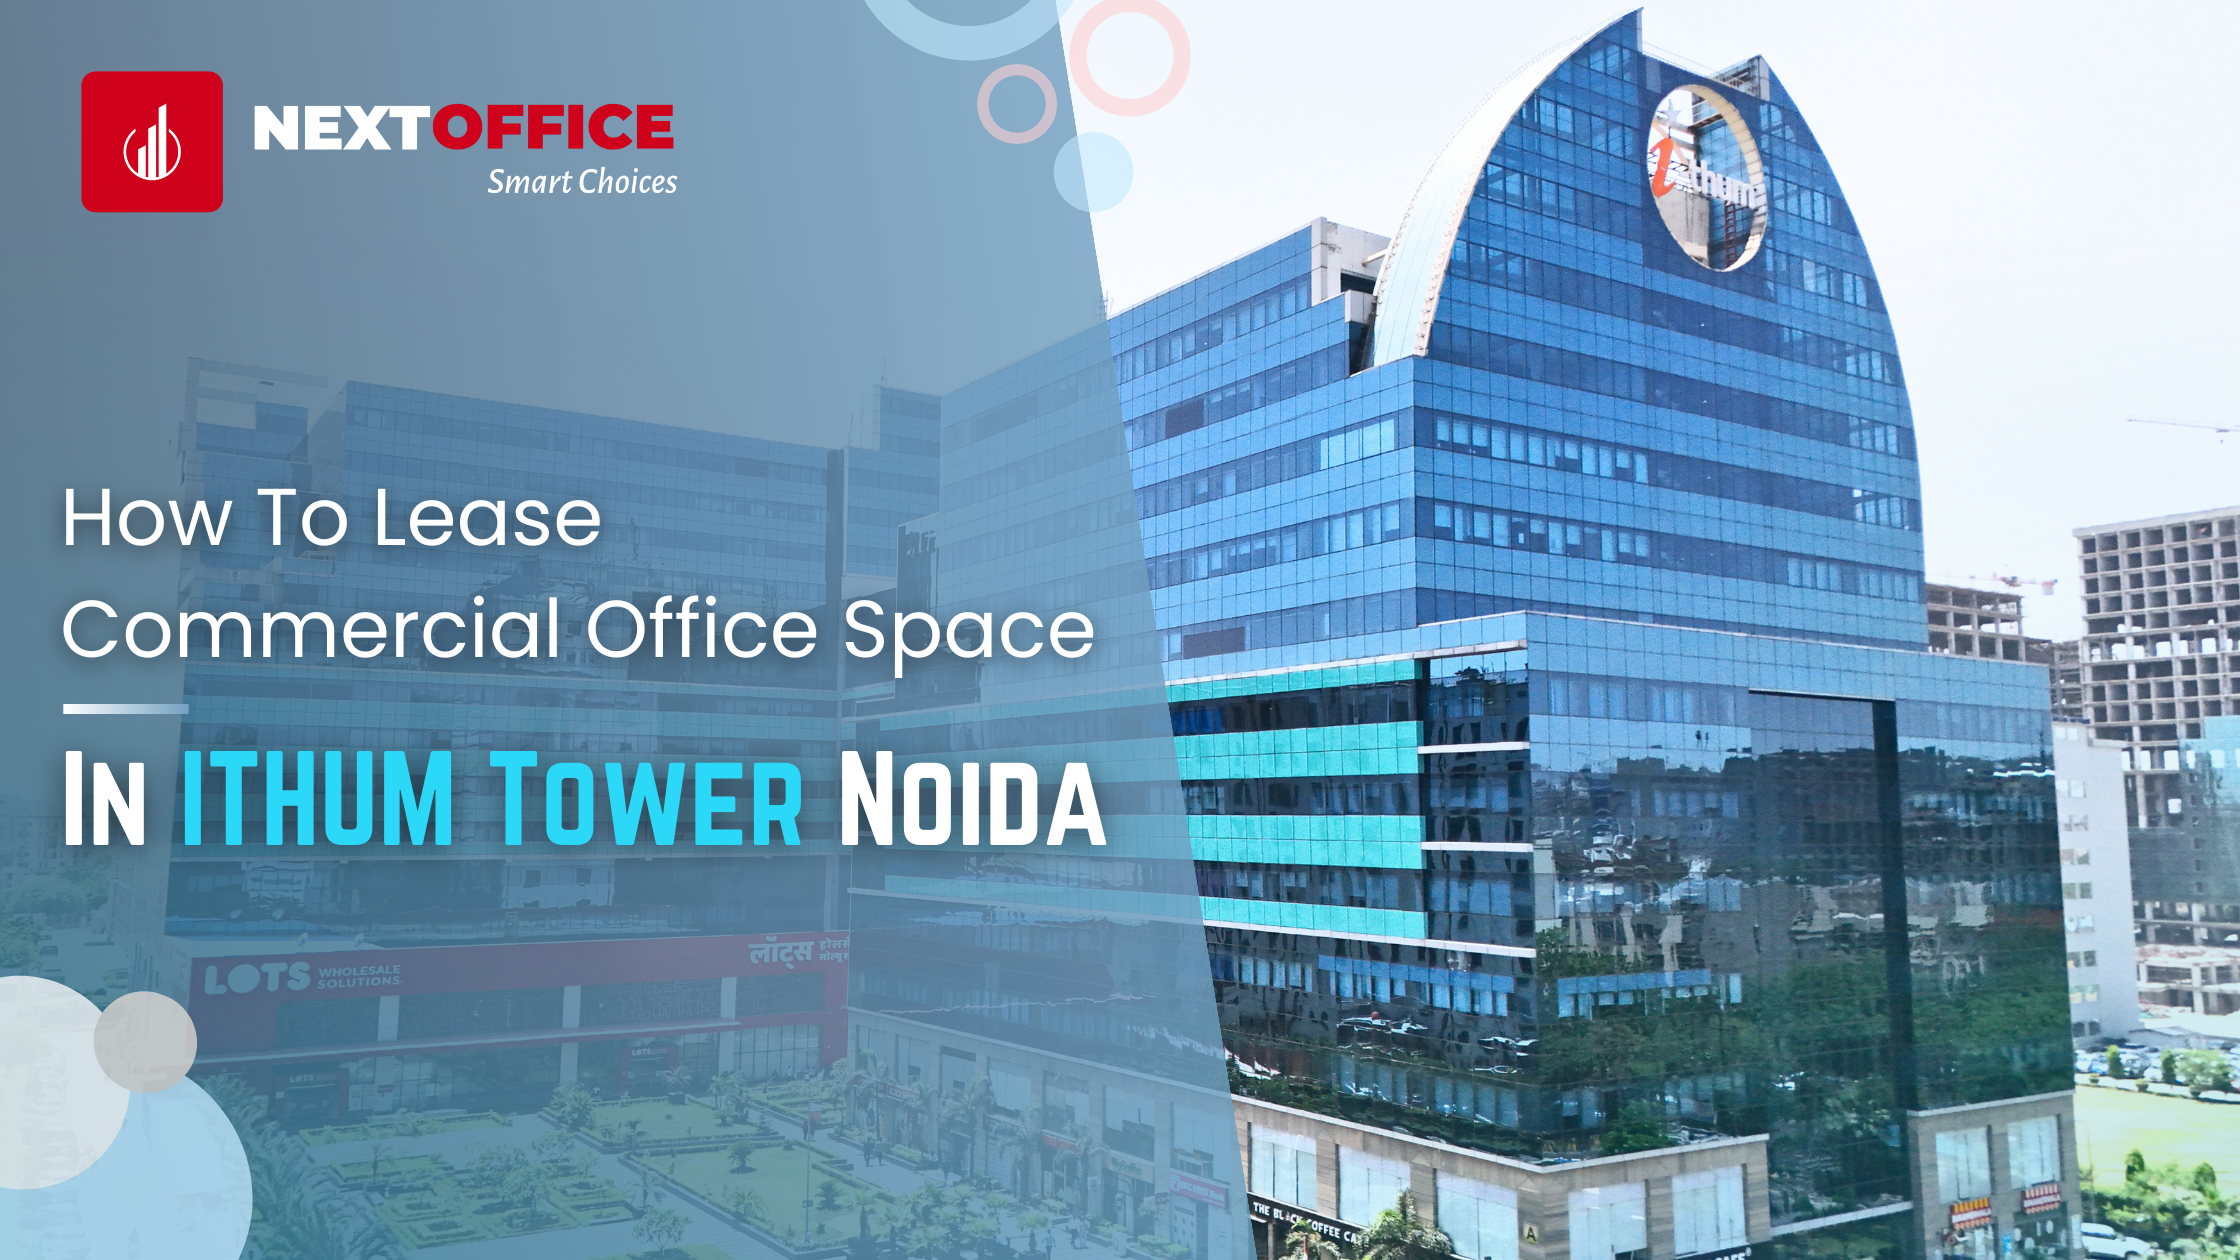 How To Lease Commercial Office Space In ITHUM Tower Noida 